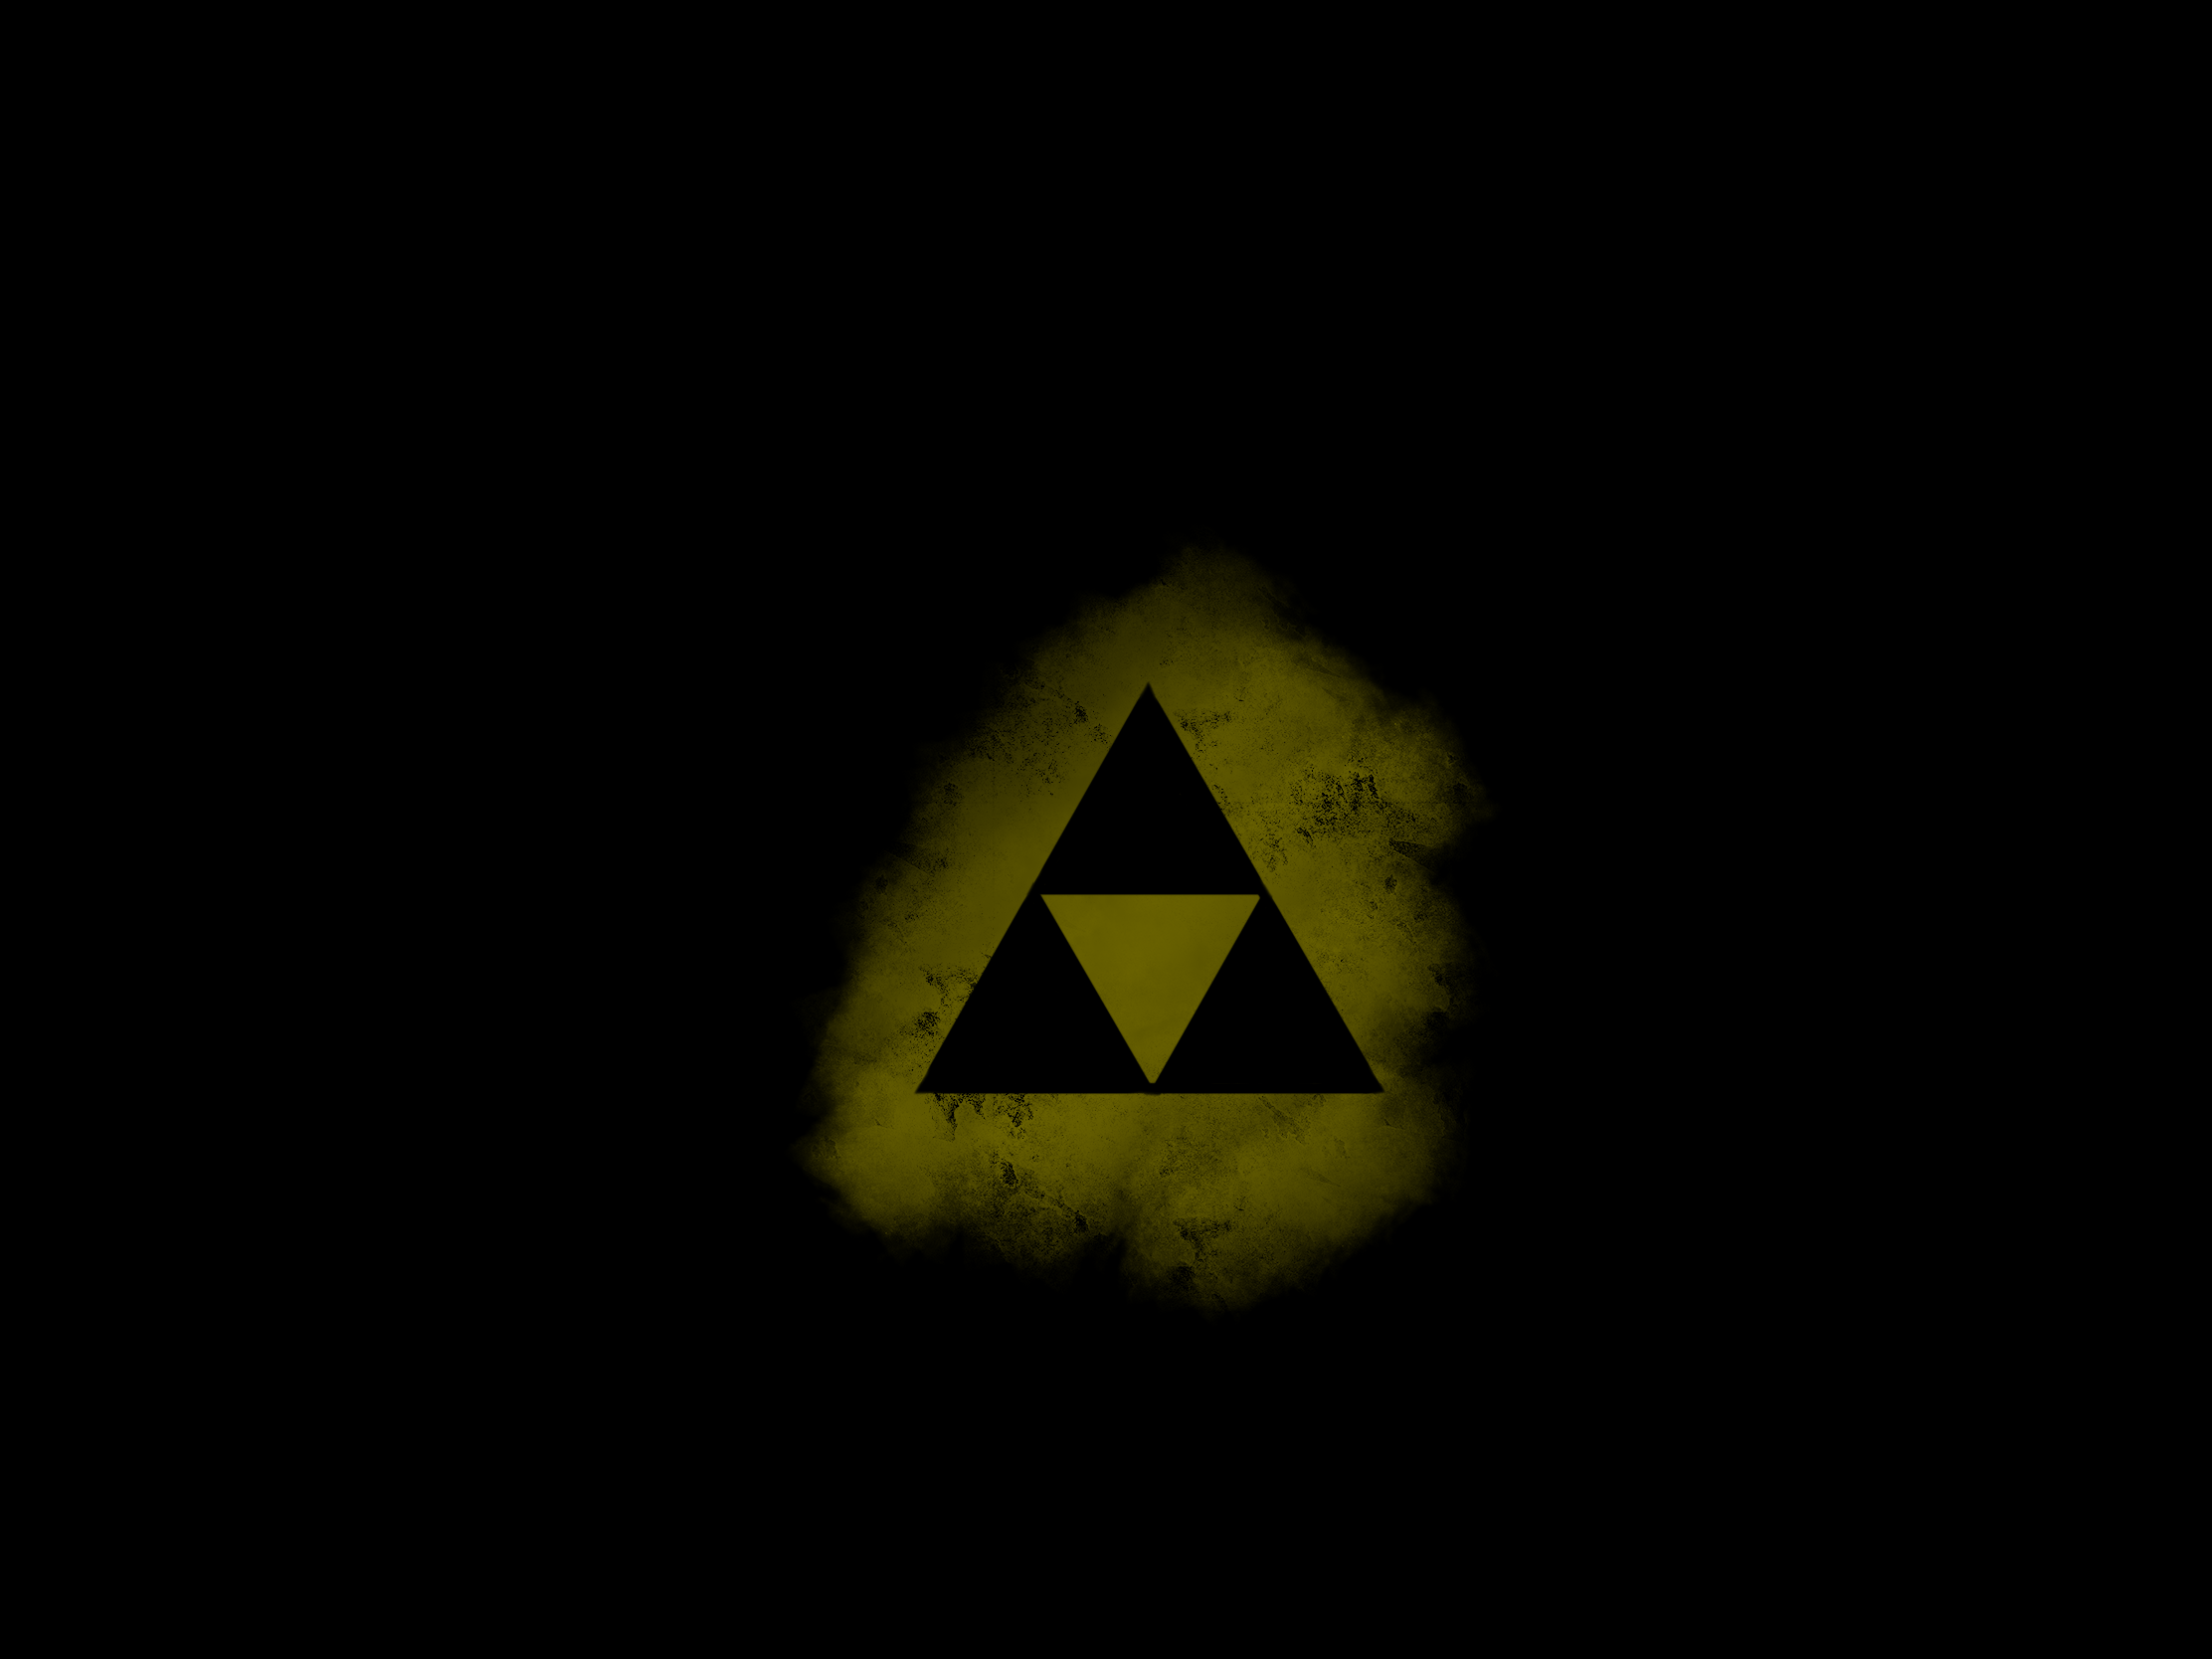 I did a simple triforce amoled wallpaper in class today, thought some of you might enjoy it [OC]